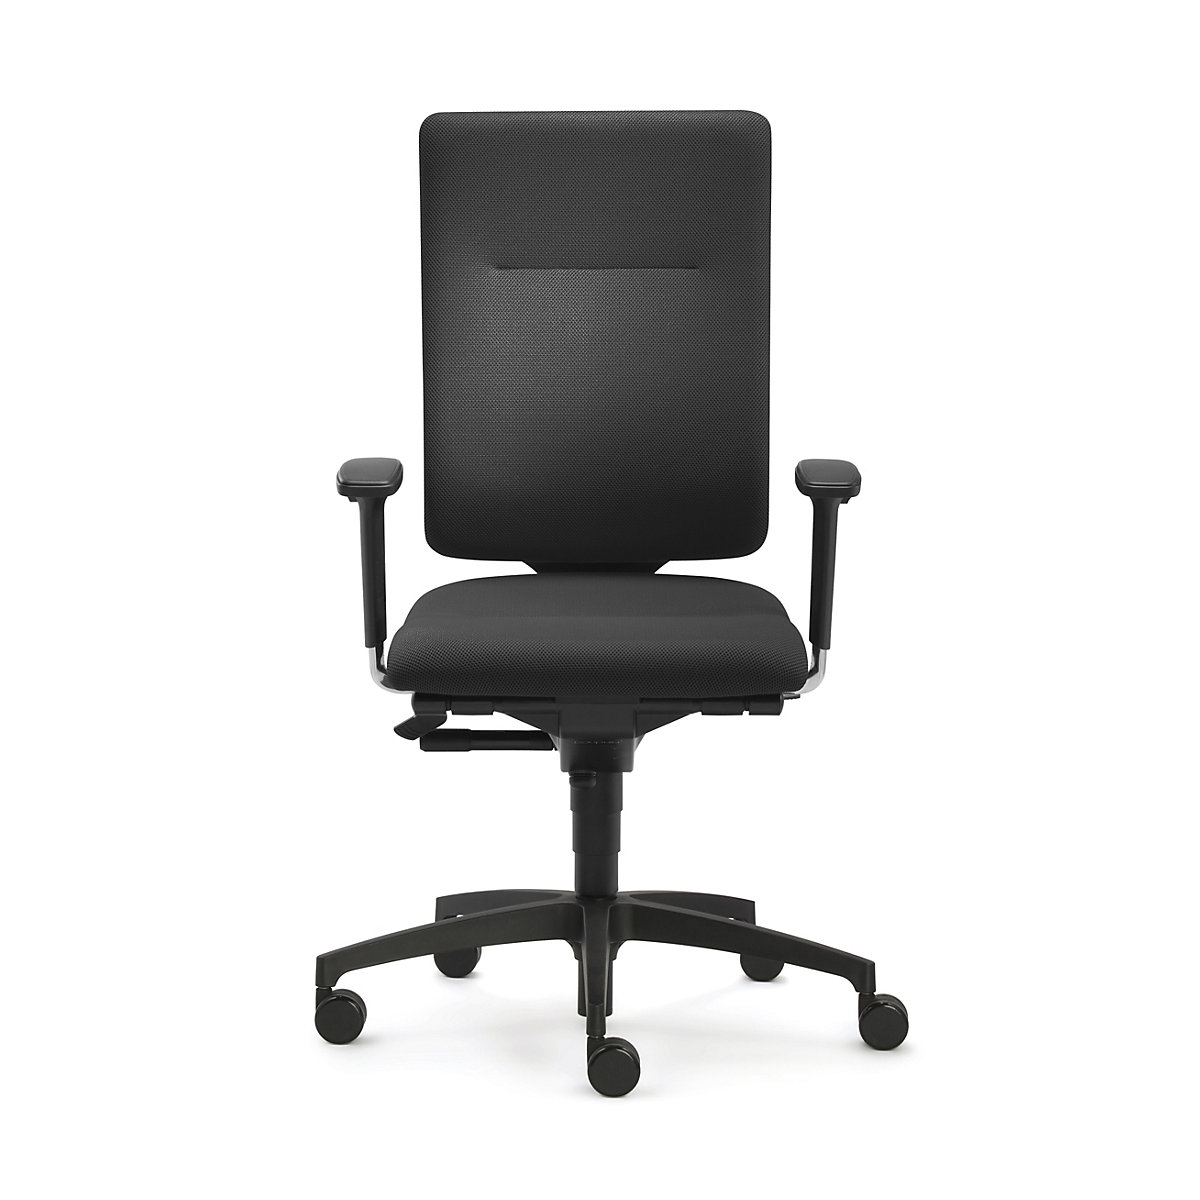 InTouch office swivel chair – Dauphin